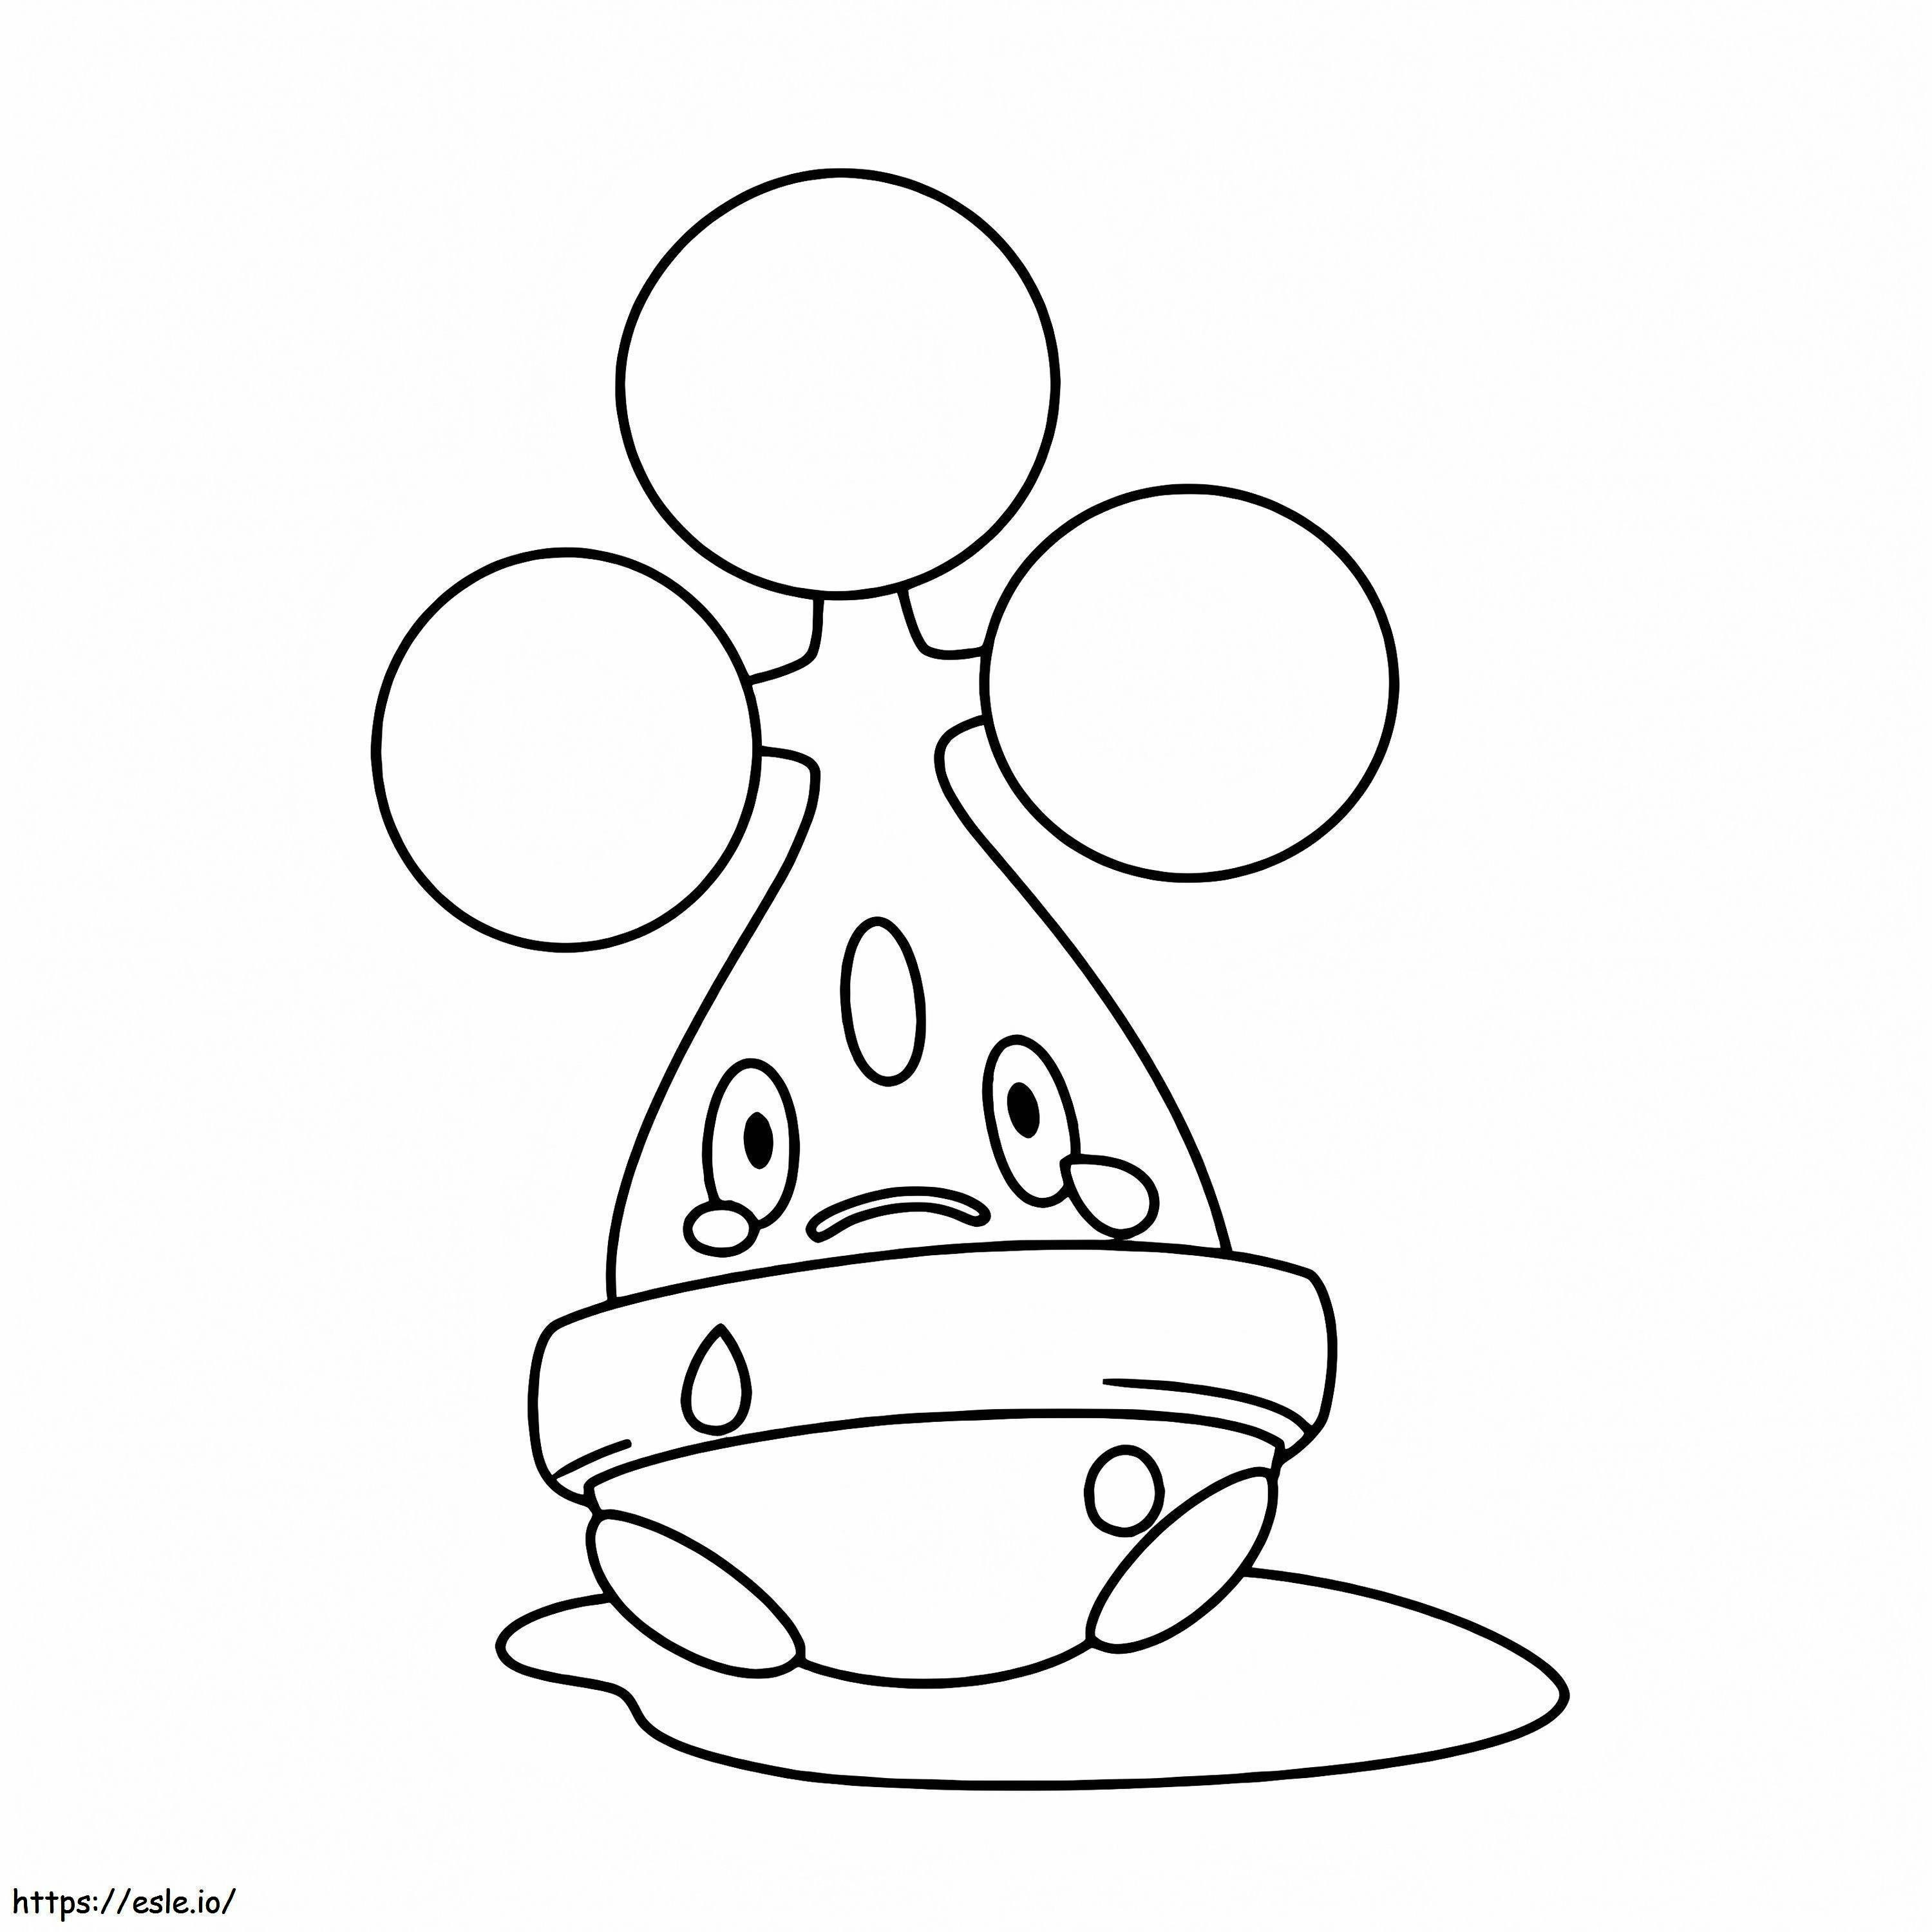 Cute Bonsly Pokemon coloring page